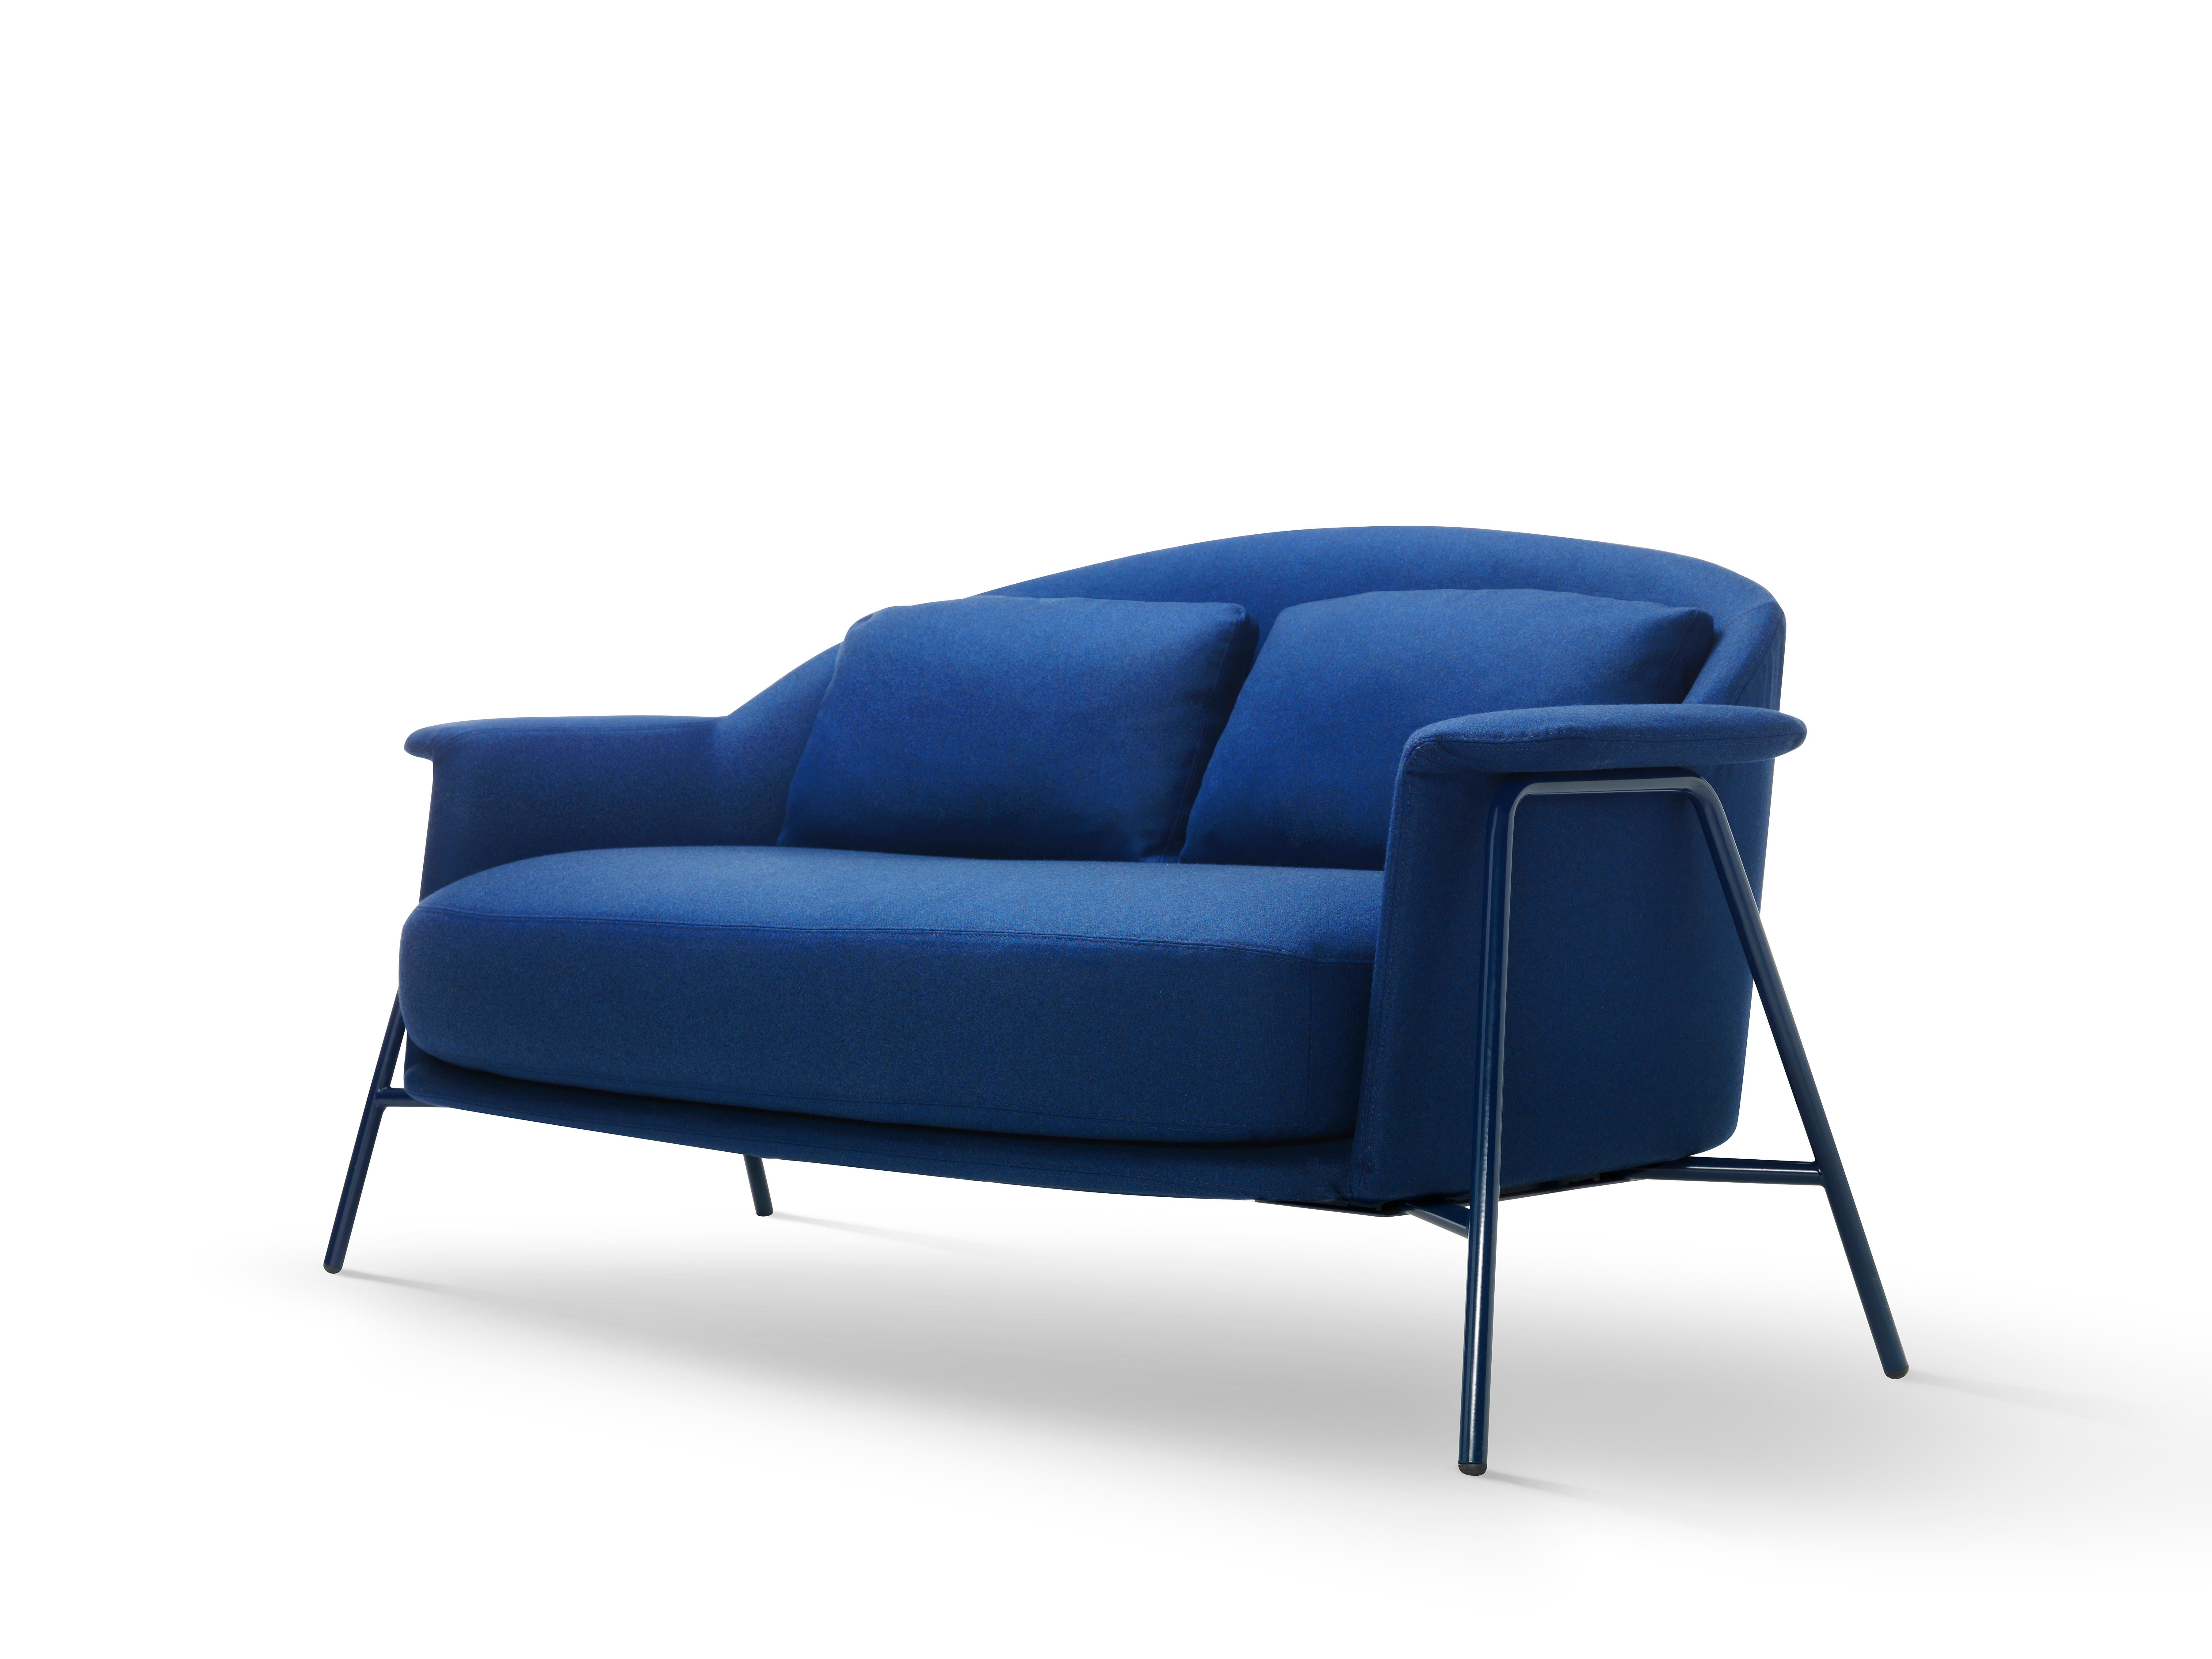 The Kepi sofa’s sober design and vaguely Nordic look are softened by rounded lines that add character and improve comfort. This is the Kepi sofa, featuring complete symmetry with two back cushions and one seat cushion. Its clean design and